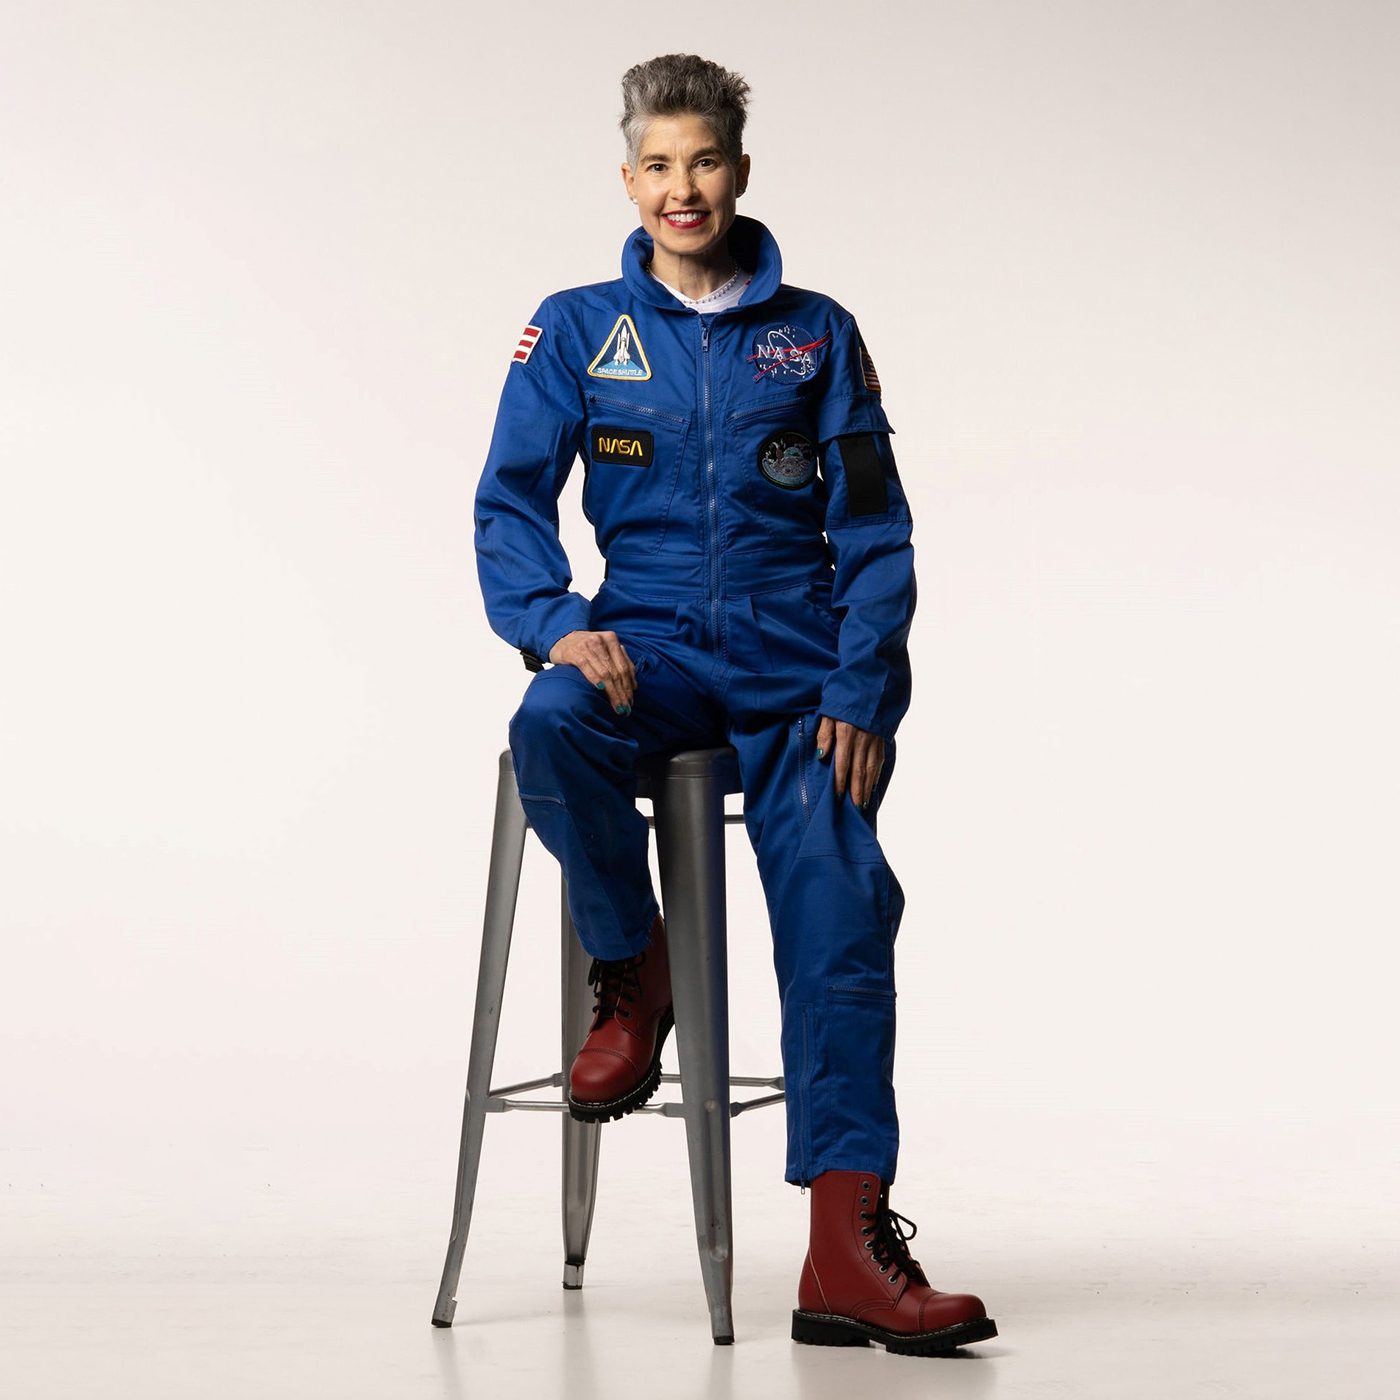 Dr. Anabelle Broadbent in a NASA Flight Suit